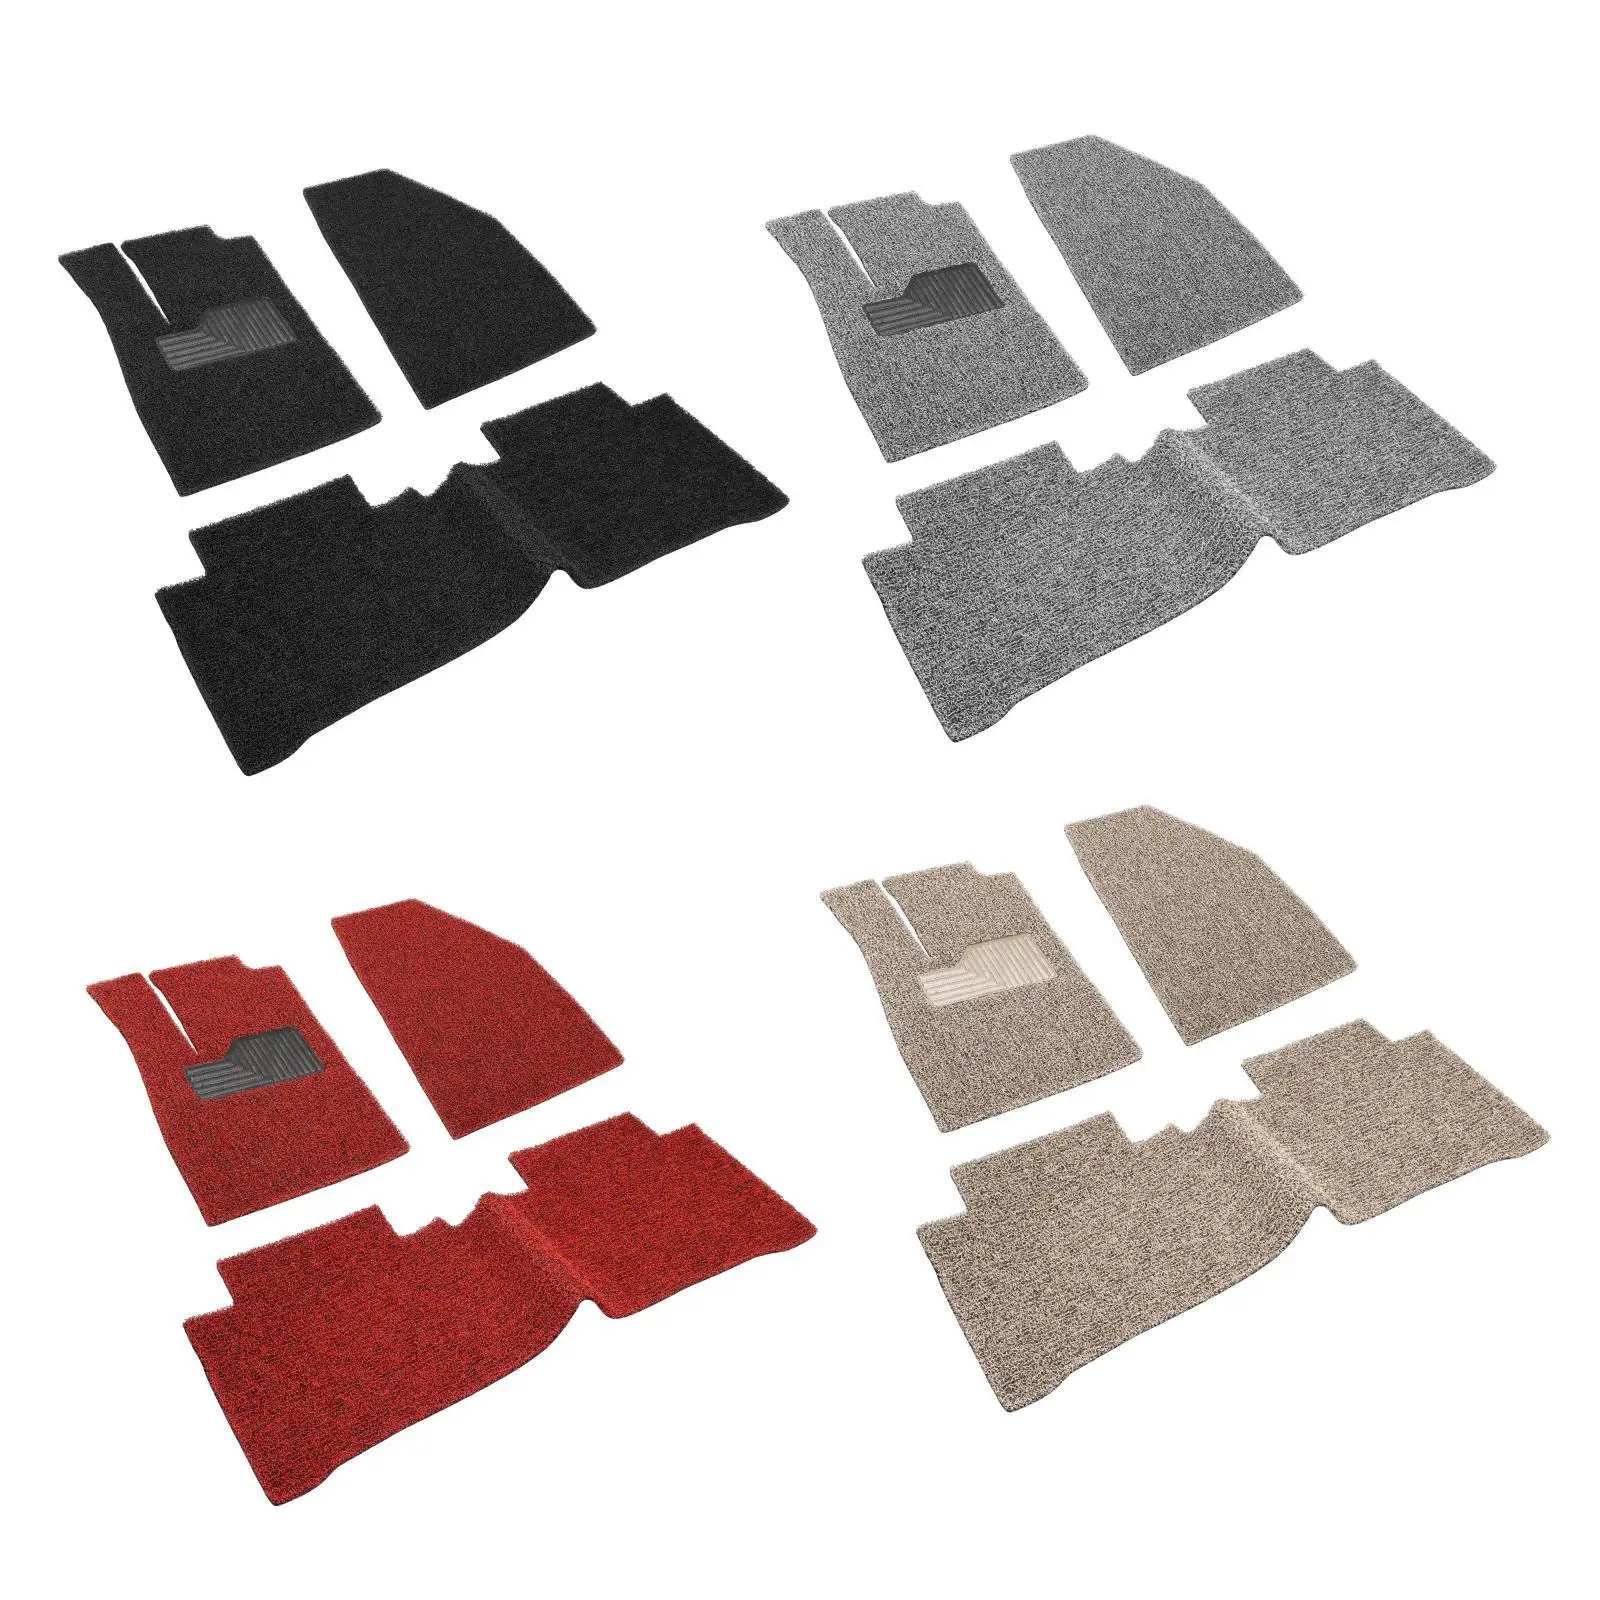 3x Automotive Floor Mats Protection PVC High Toughness Practical Convenient for Byd Yuan Plus Atto 3 21-23